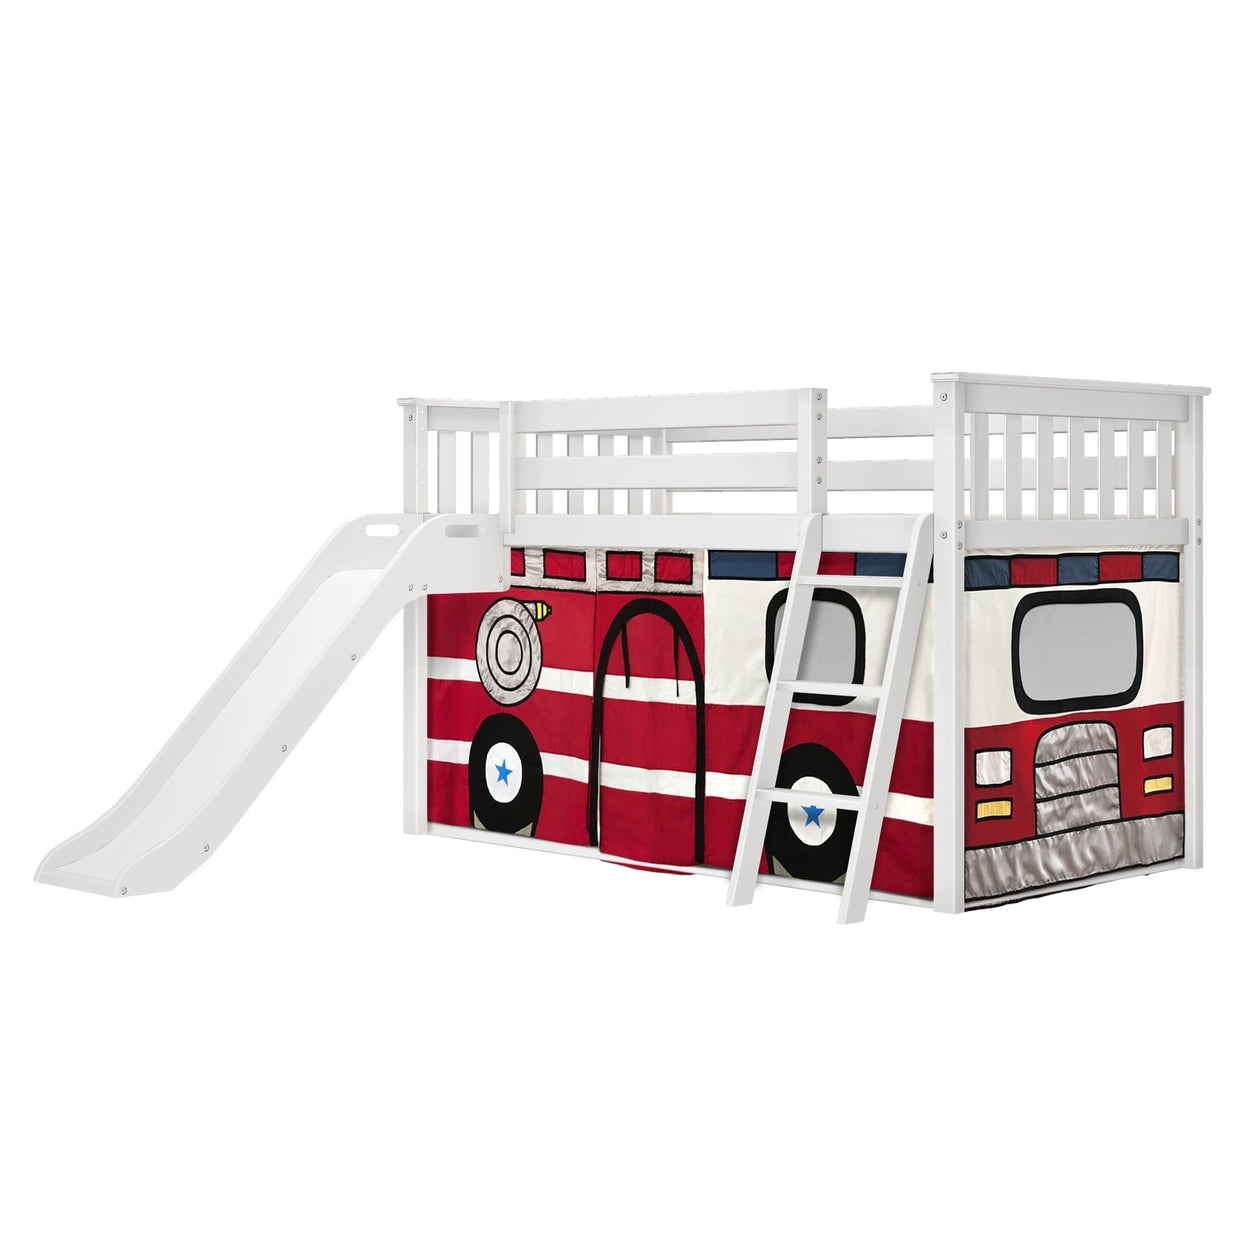 180417002043 : Bunk Beds Low Bunk with Easy Slide and Firetruck Curtain, White